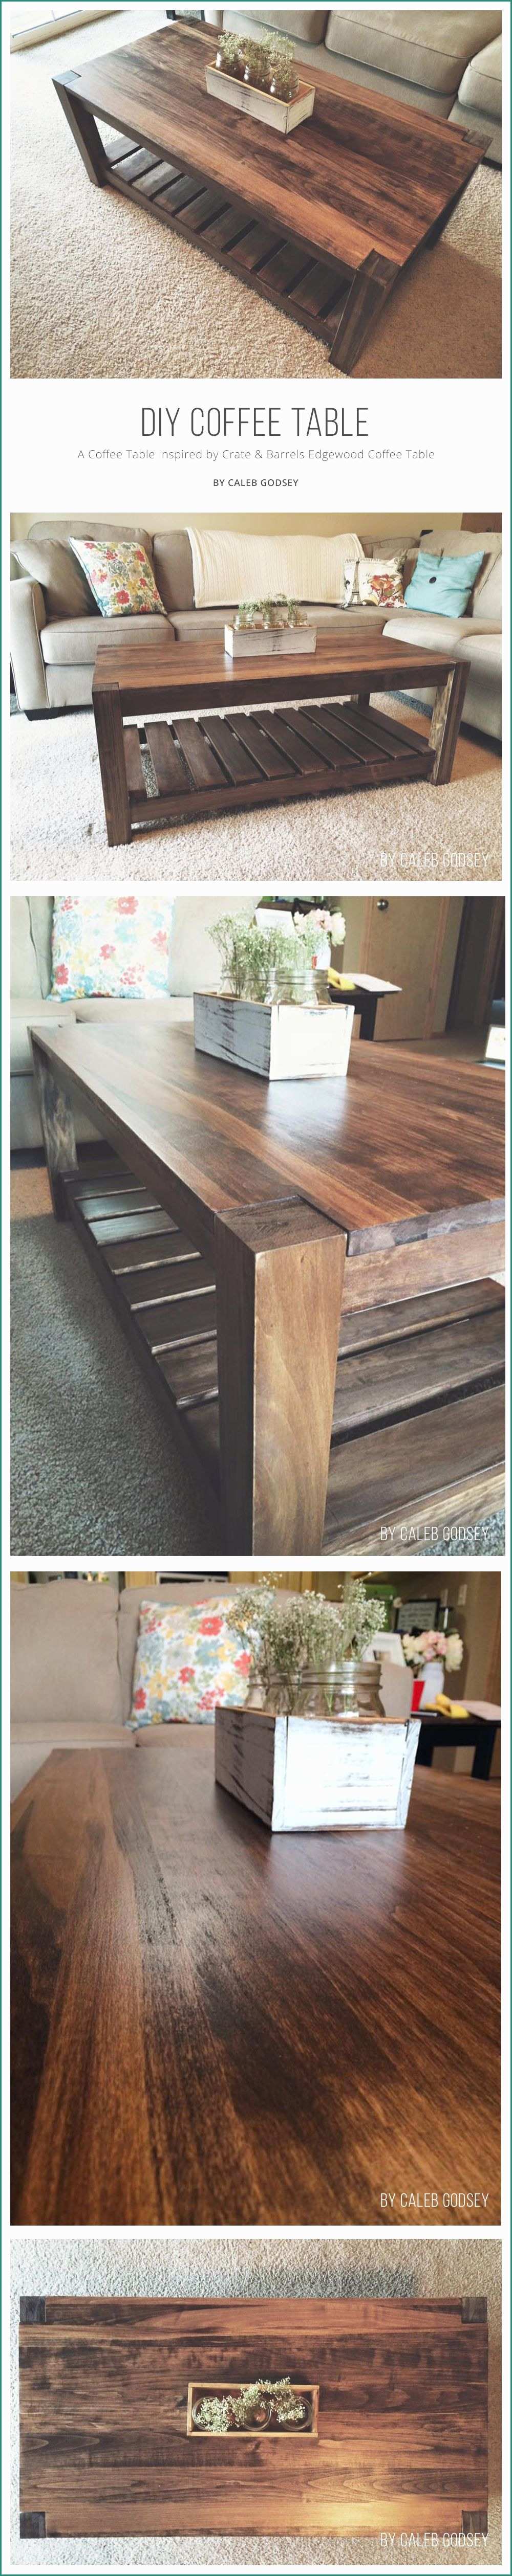 Scrivania Con Pallet E A Beautiful aspen and Pine Diy Coffee Table Inspired by Crate